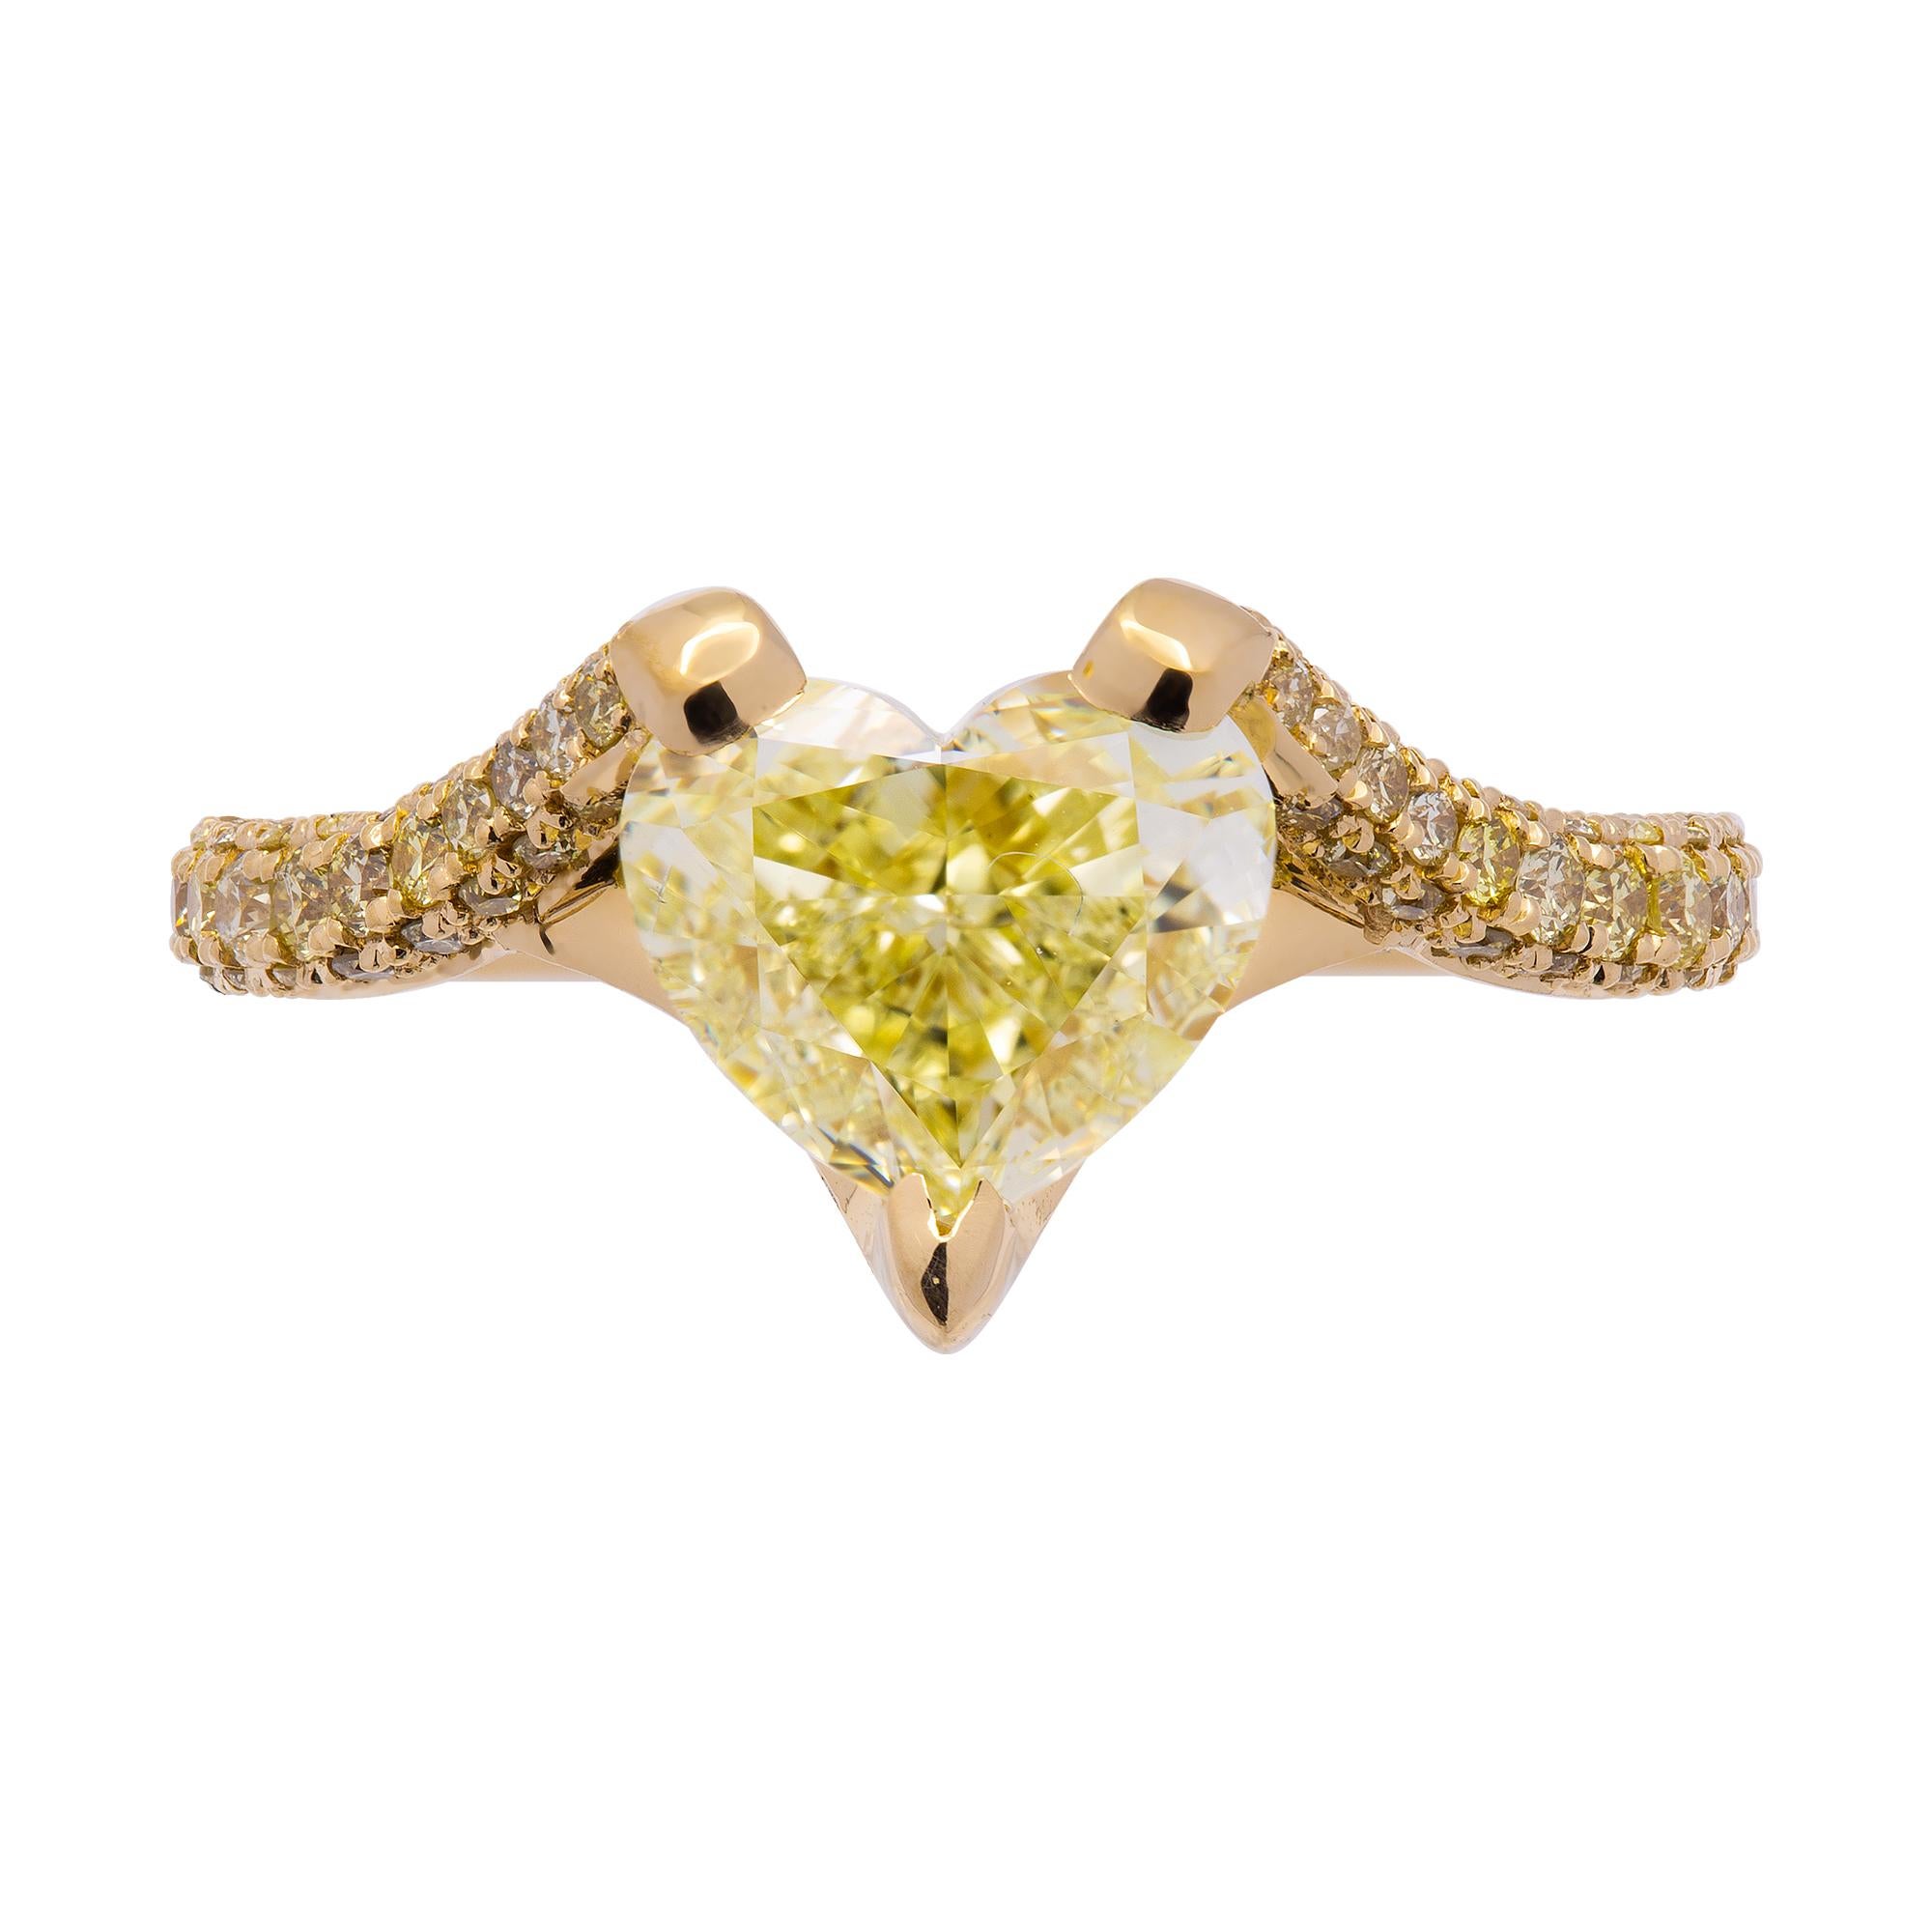 This is ring is a true masterpiece! A real rare find center stone Natural Fancy Color Diamond is unique and special, definitely one of a kind. 
Exclusive Hight End Piece! 
Very vibrant and Vivid color Heart Shaped 2.06CT Center is Natural Fancy